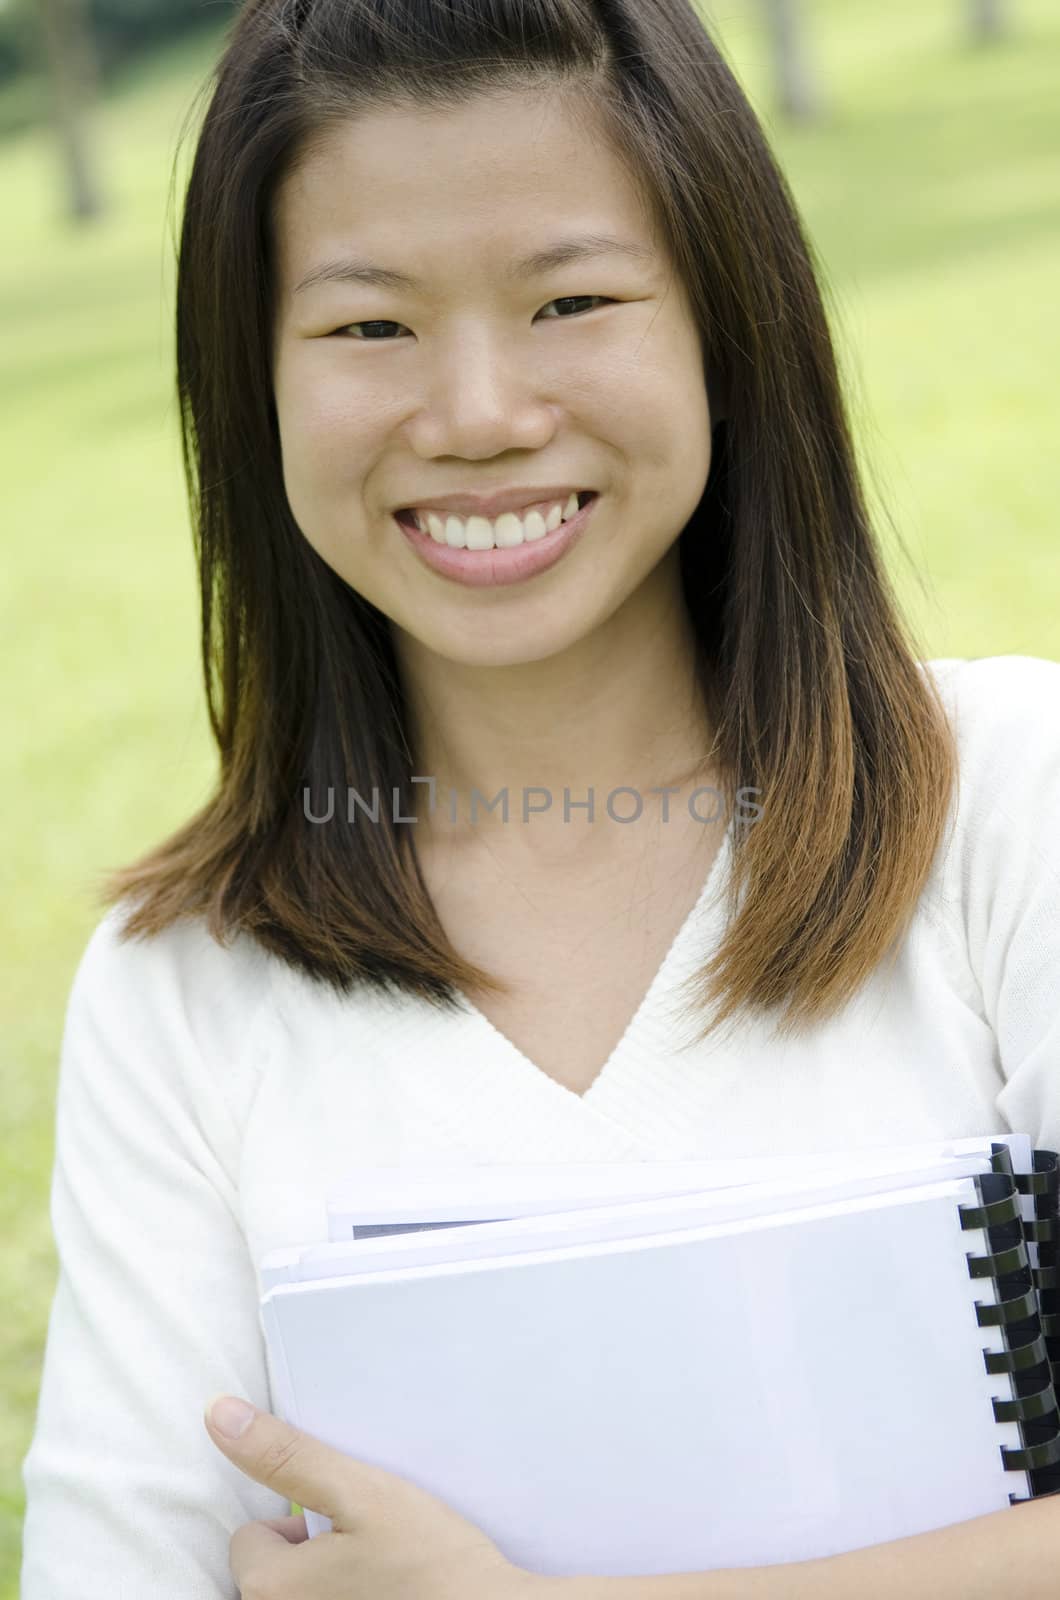 Asian college student smiling, standing at outdoor.